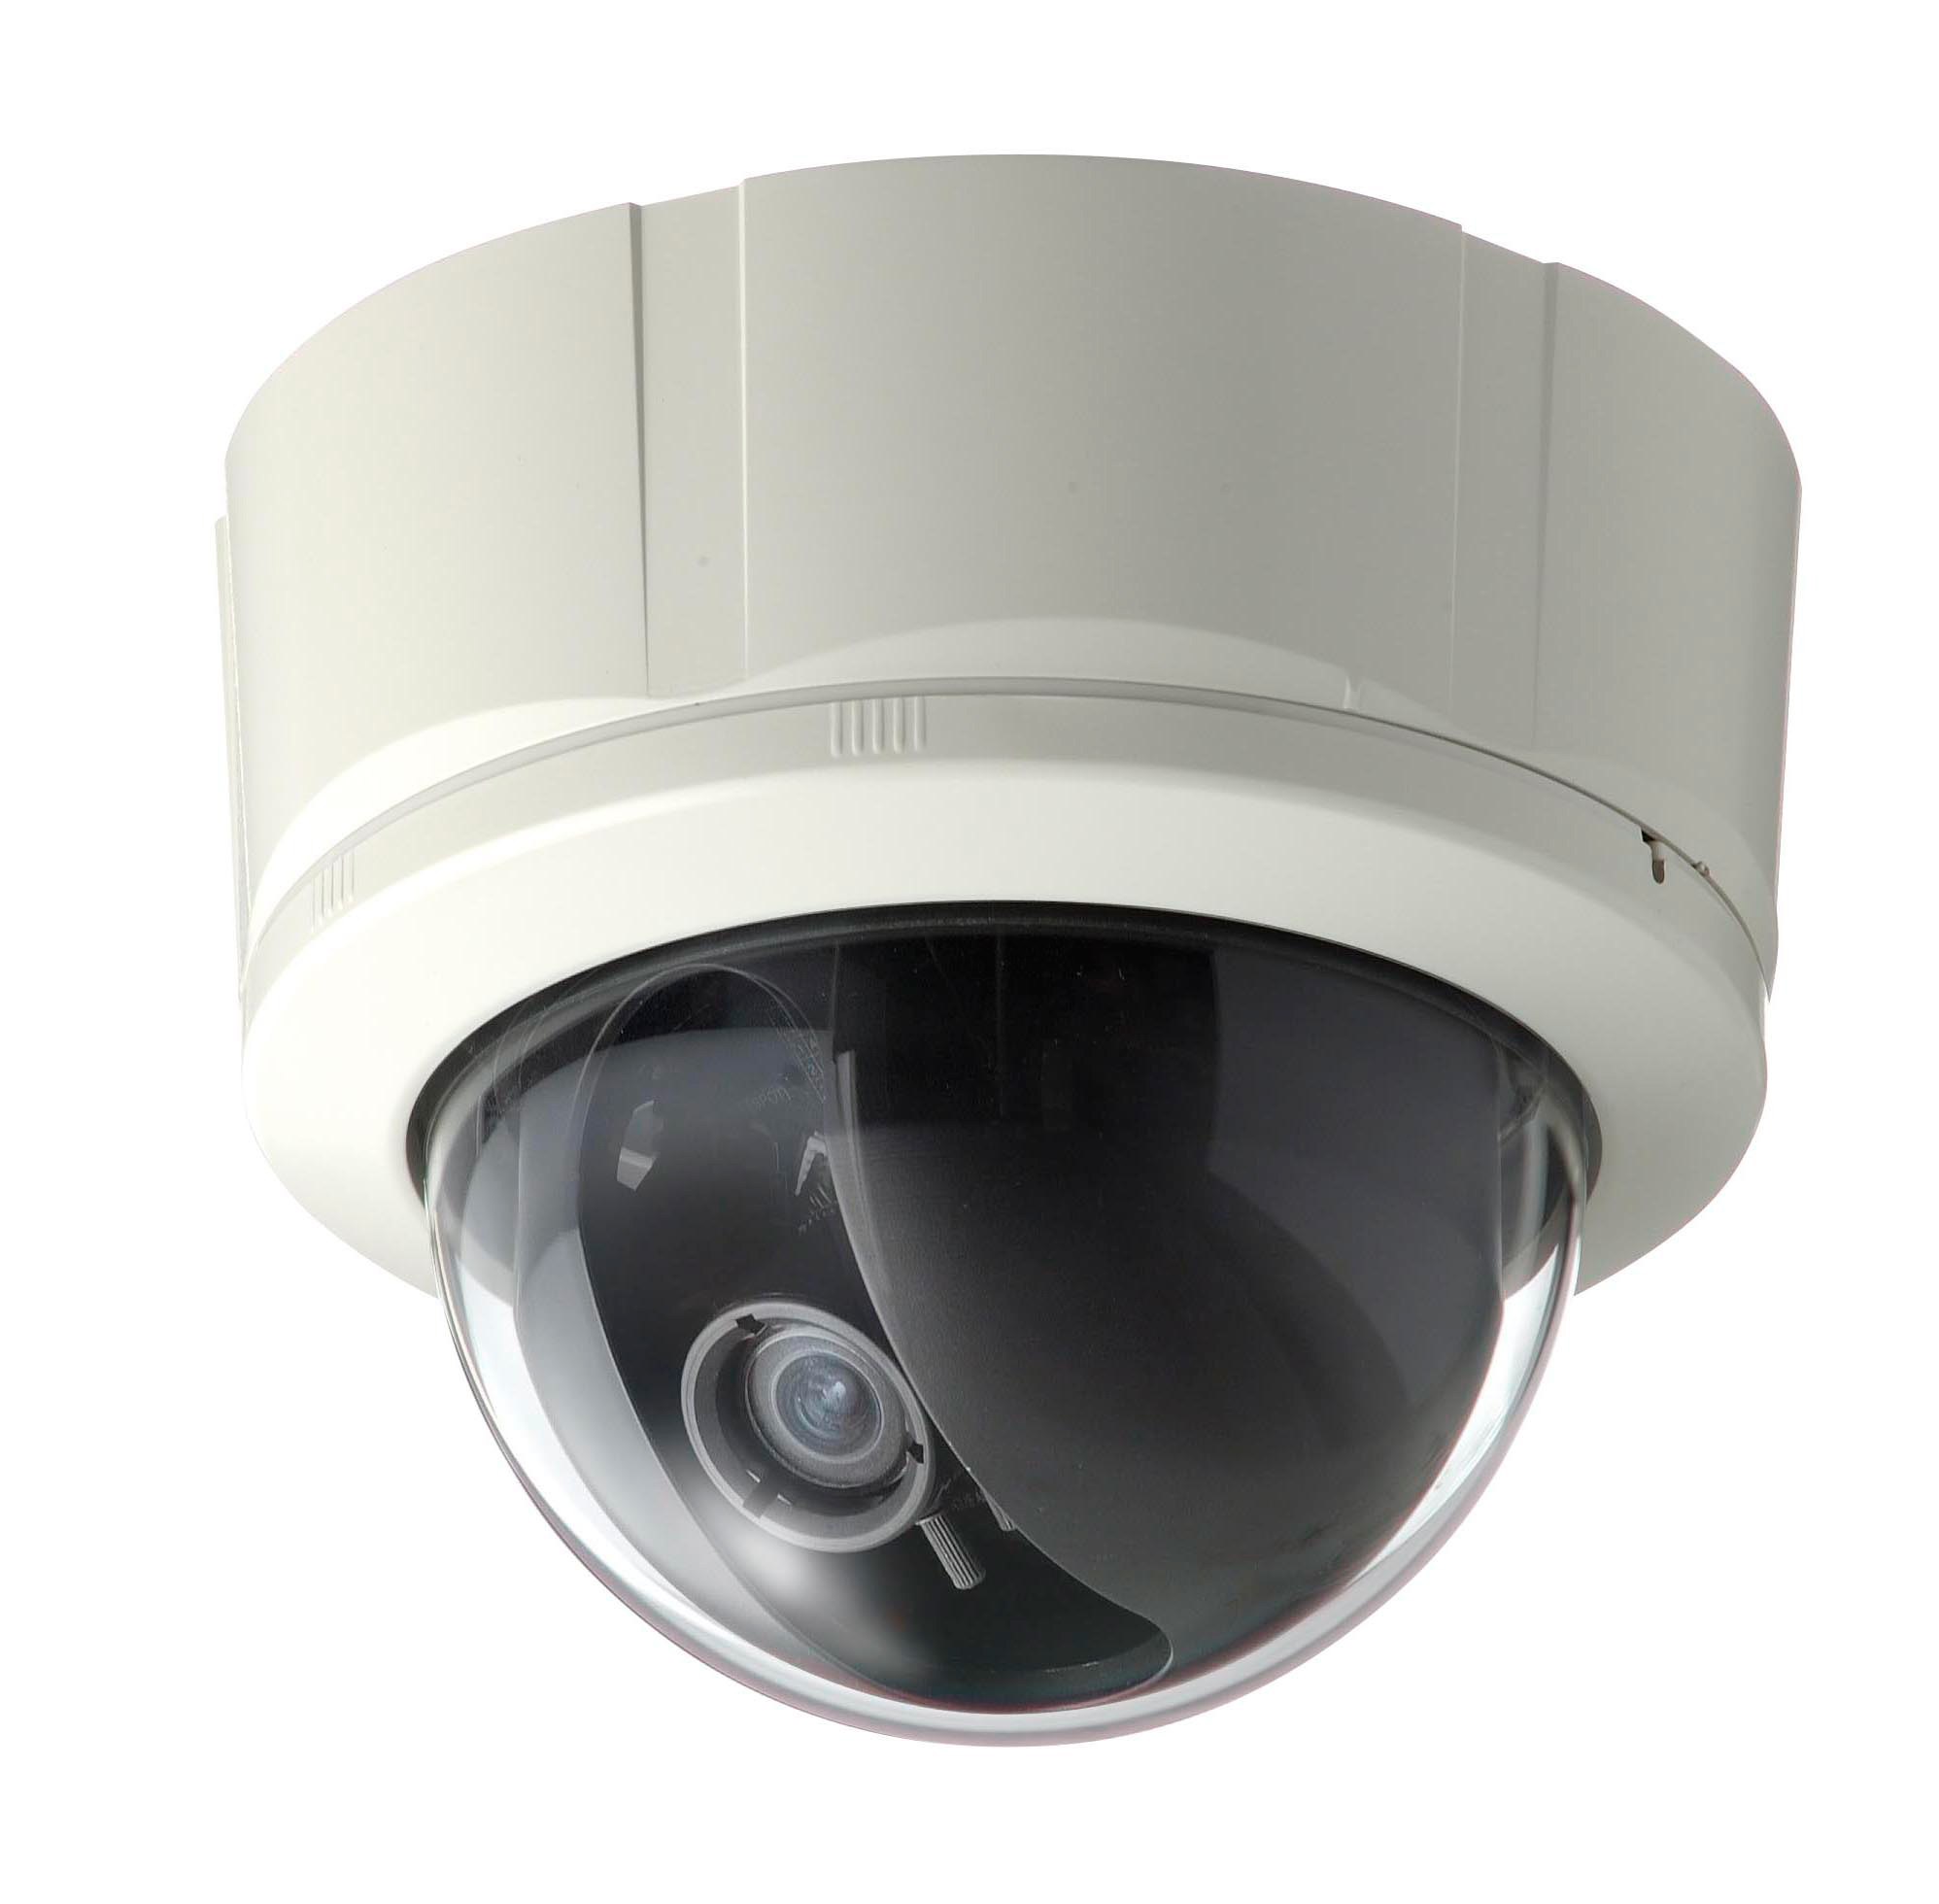 Equipment - Hy-Tec Security | Security Systems, Cameras & Alarms ...